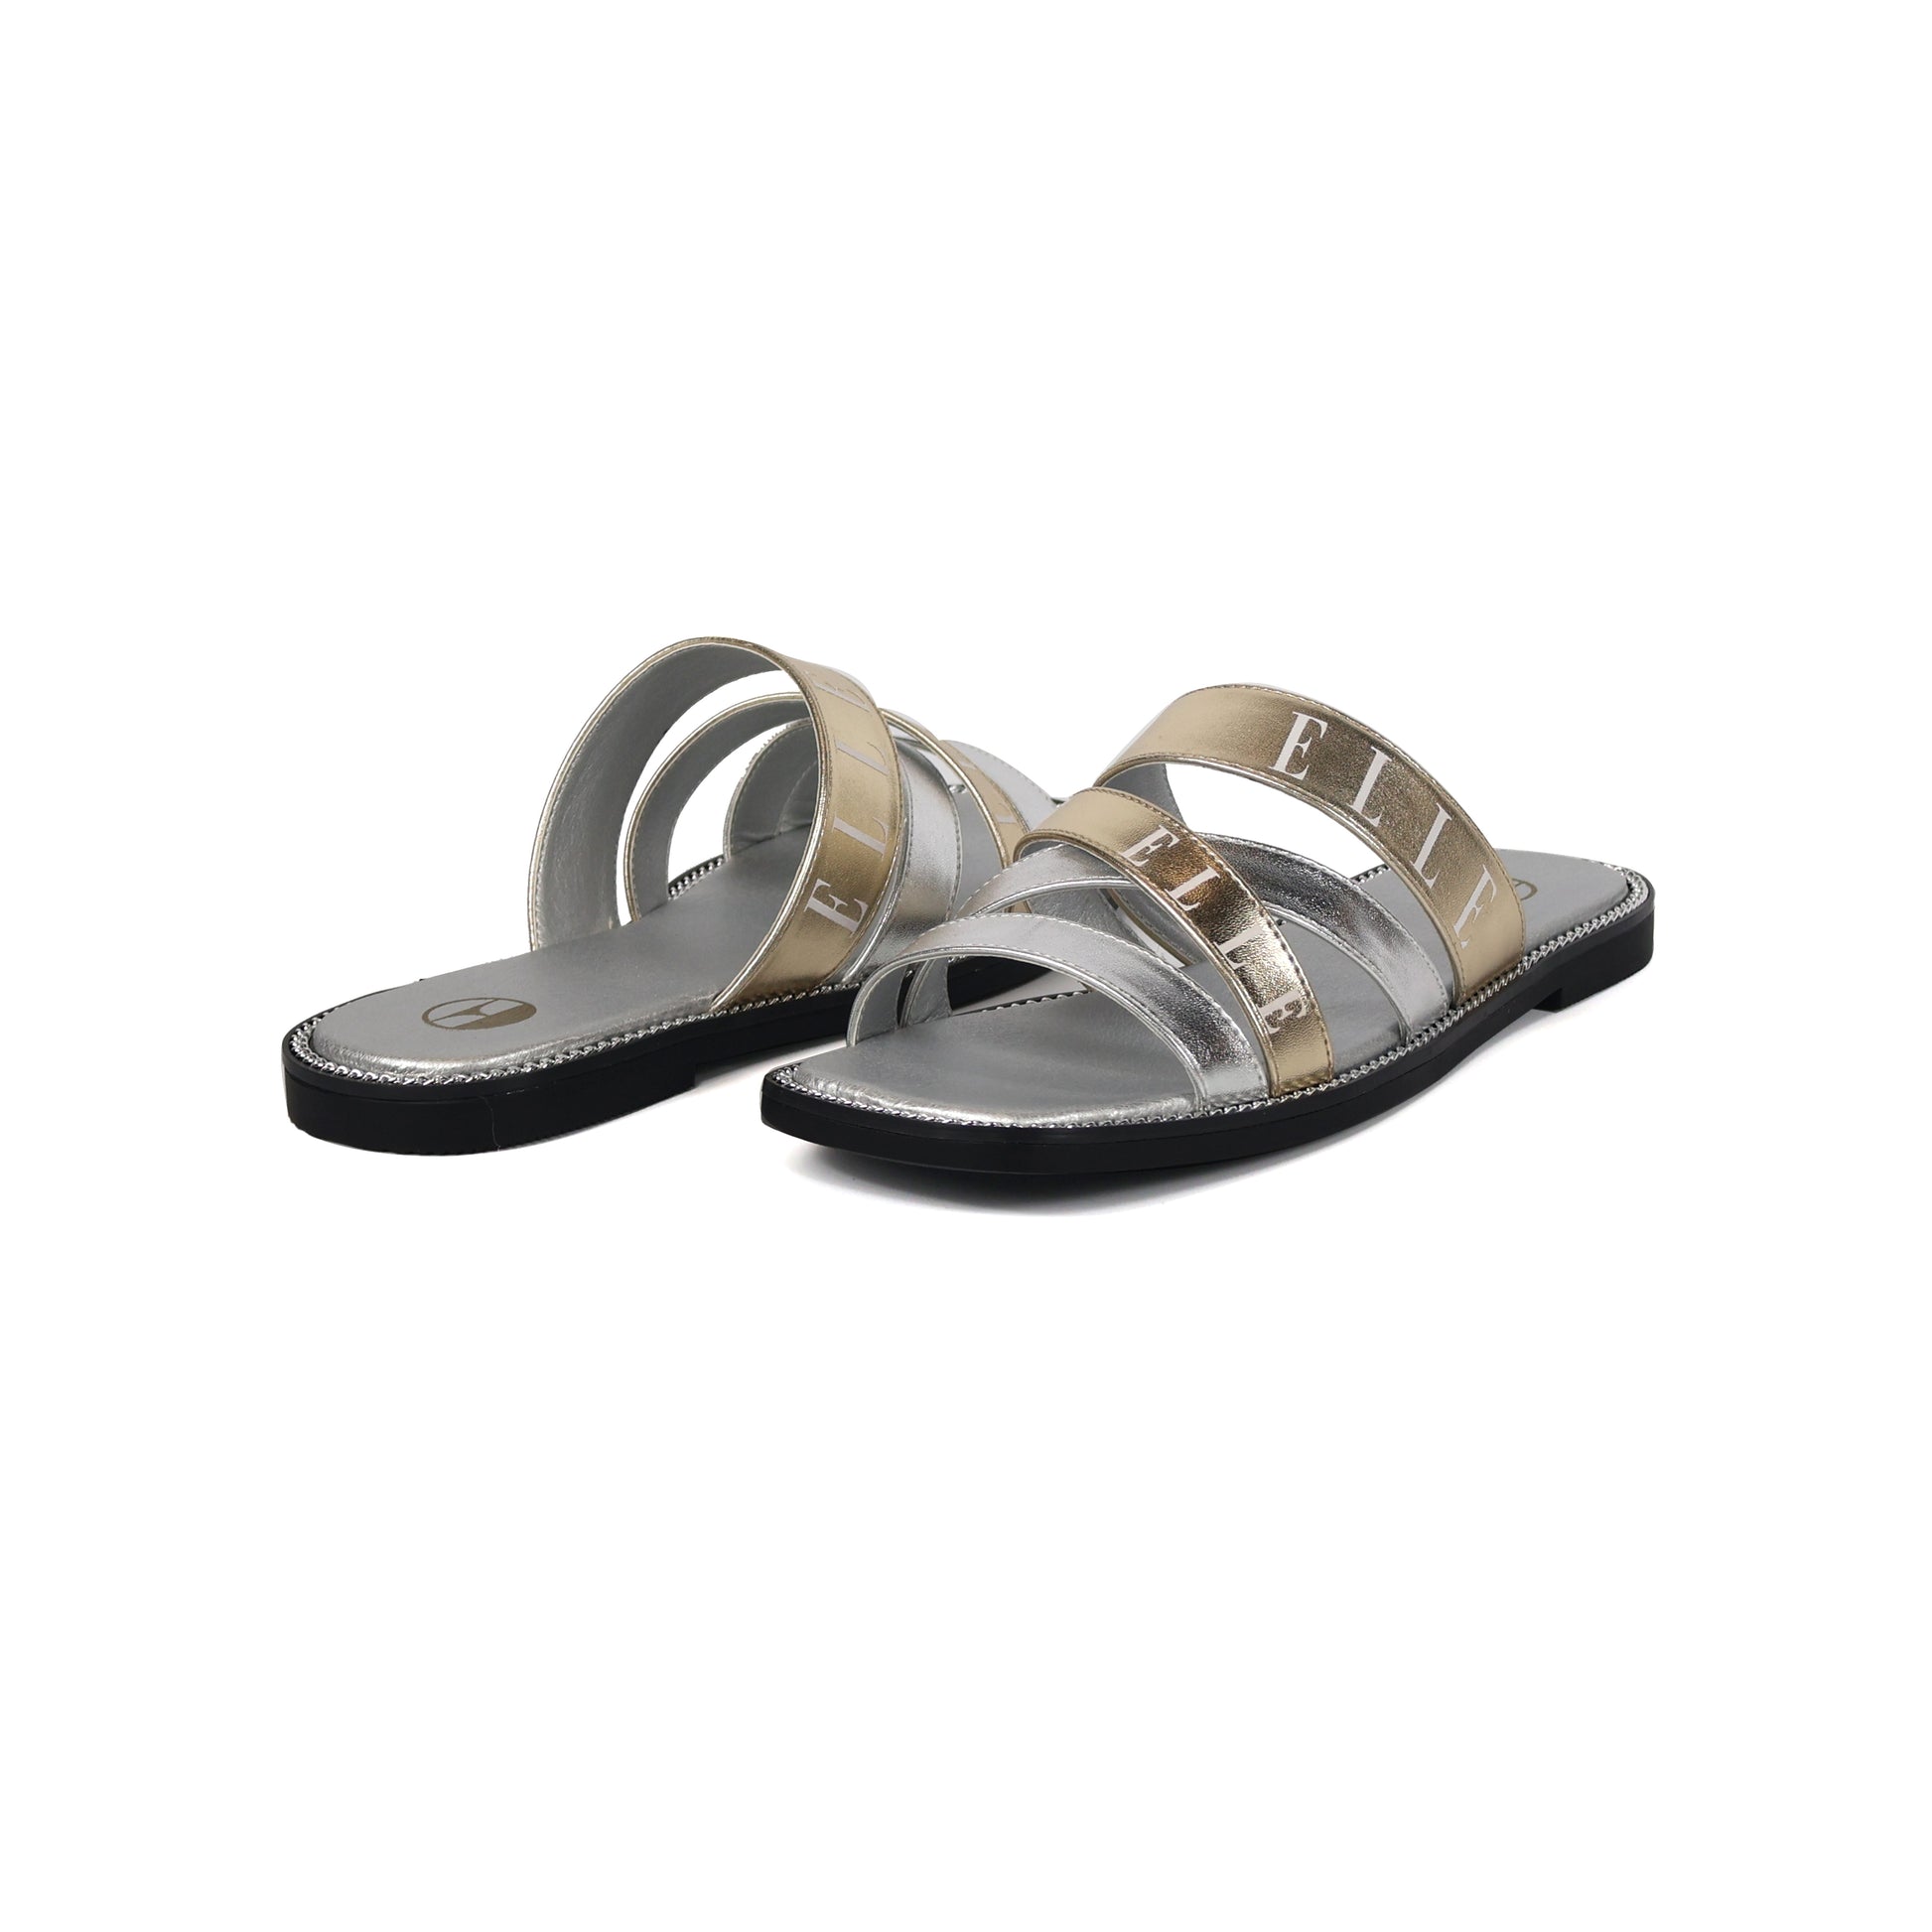 Copy of Oceana Comfy Fit Classic Faux Leather Sandal in Silver